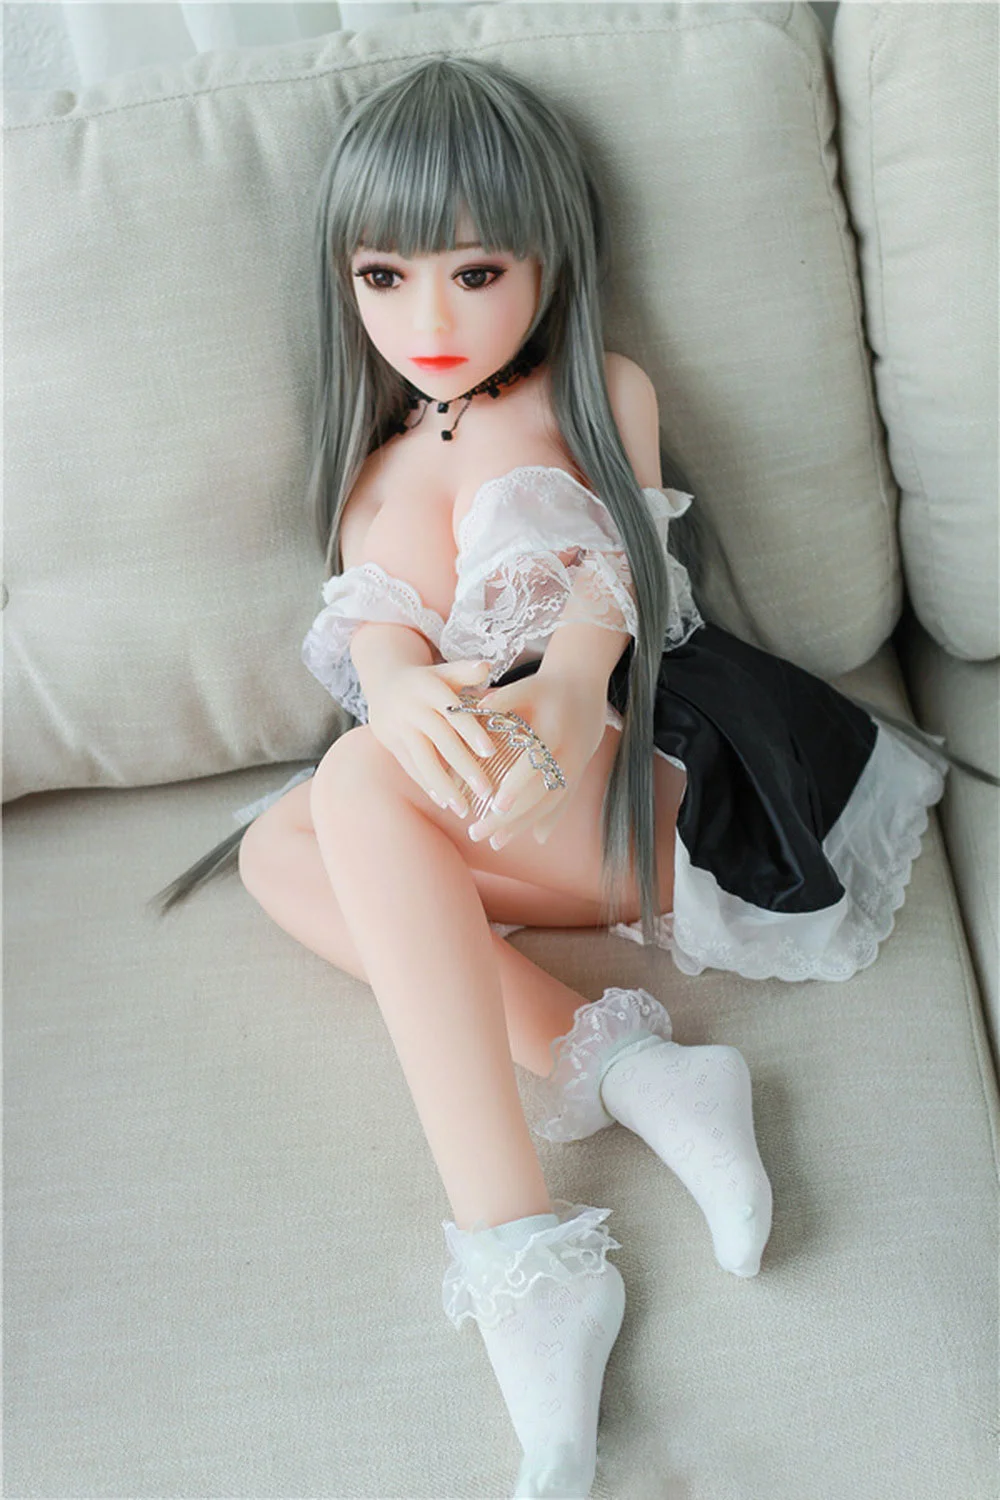 A mini sex doll with bent legs and hands on thighs